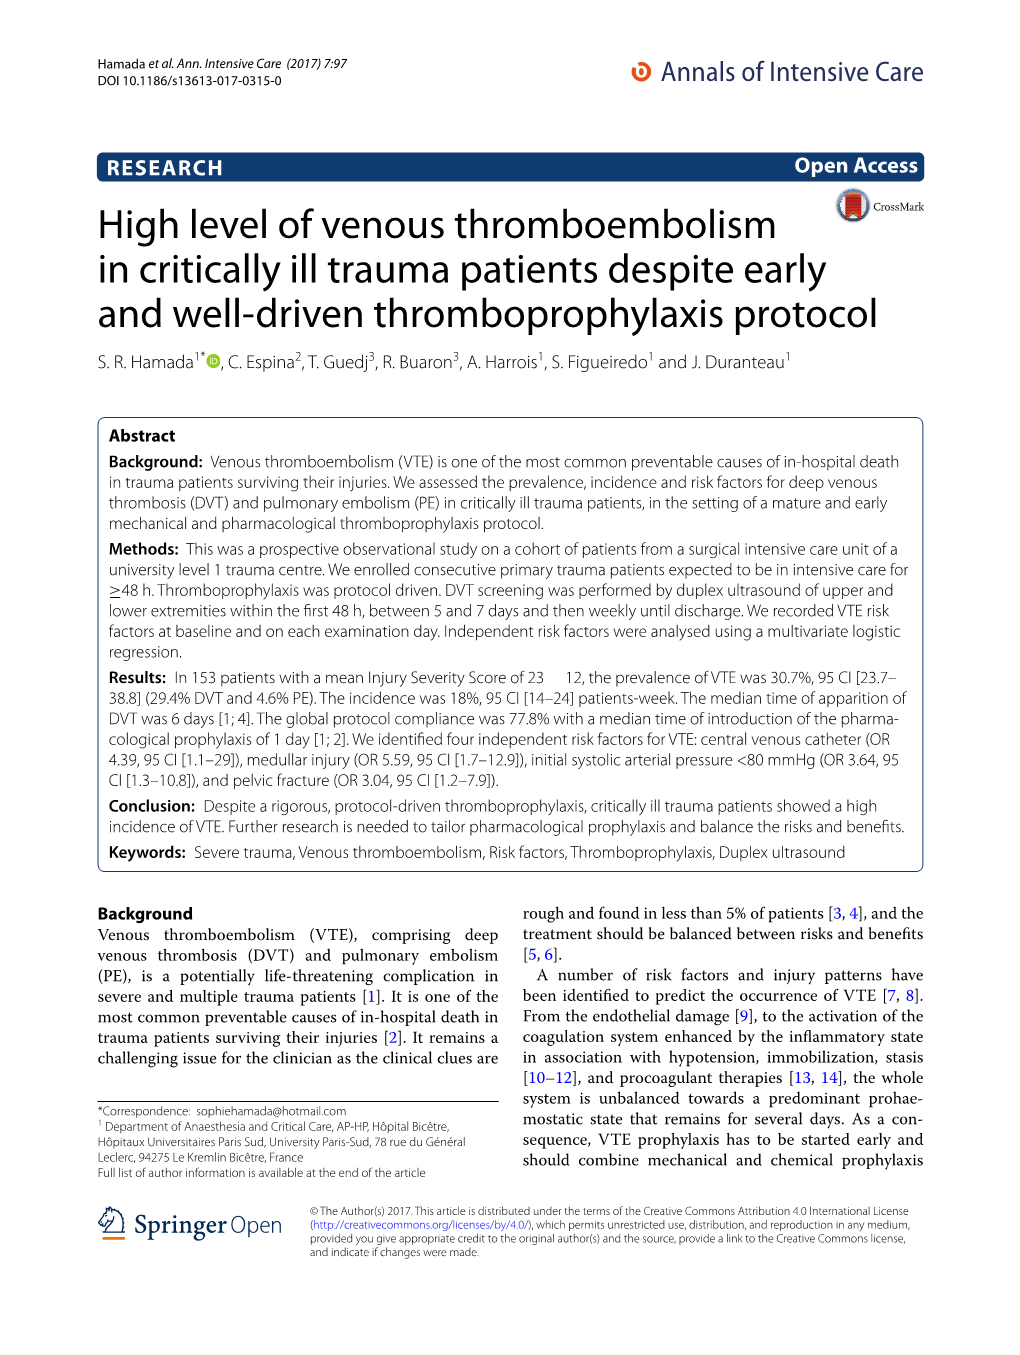 High Level of Venous Thromboembolism in Critically Ill Trauma Patients Despite Early and Well‑Driven Thromboprophylaxis Protocol S